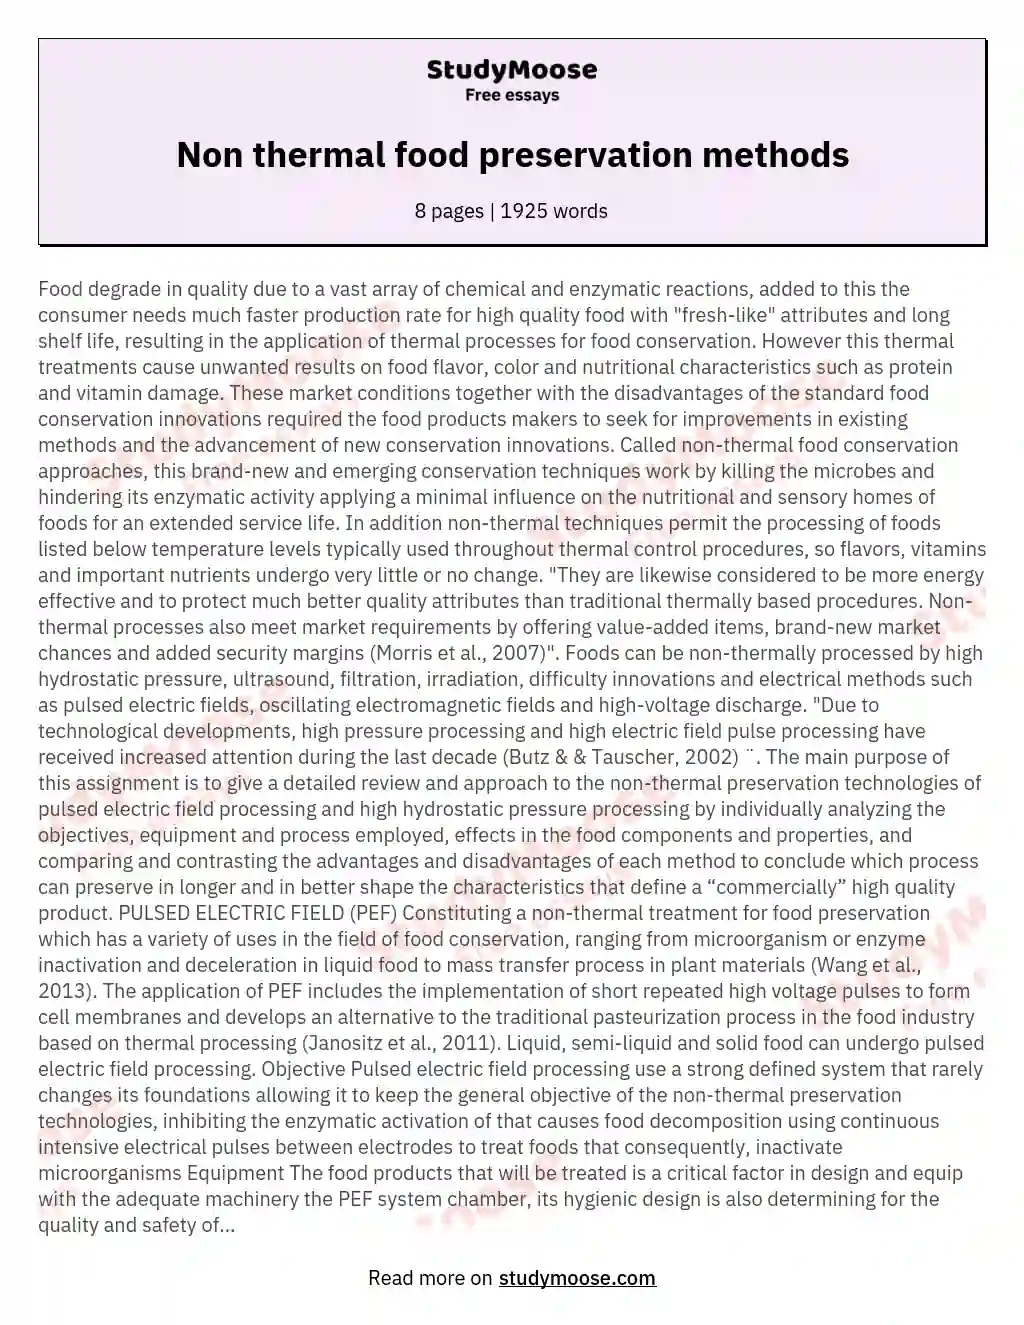 Non thermal food preservation methods essay